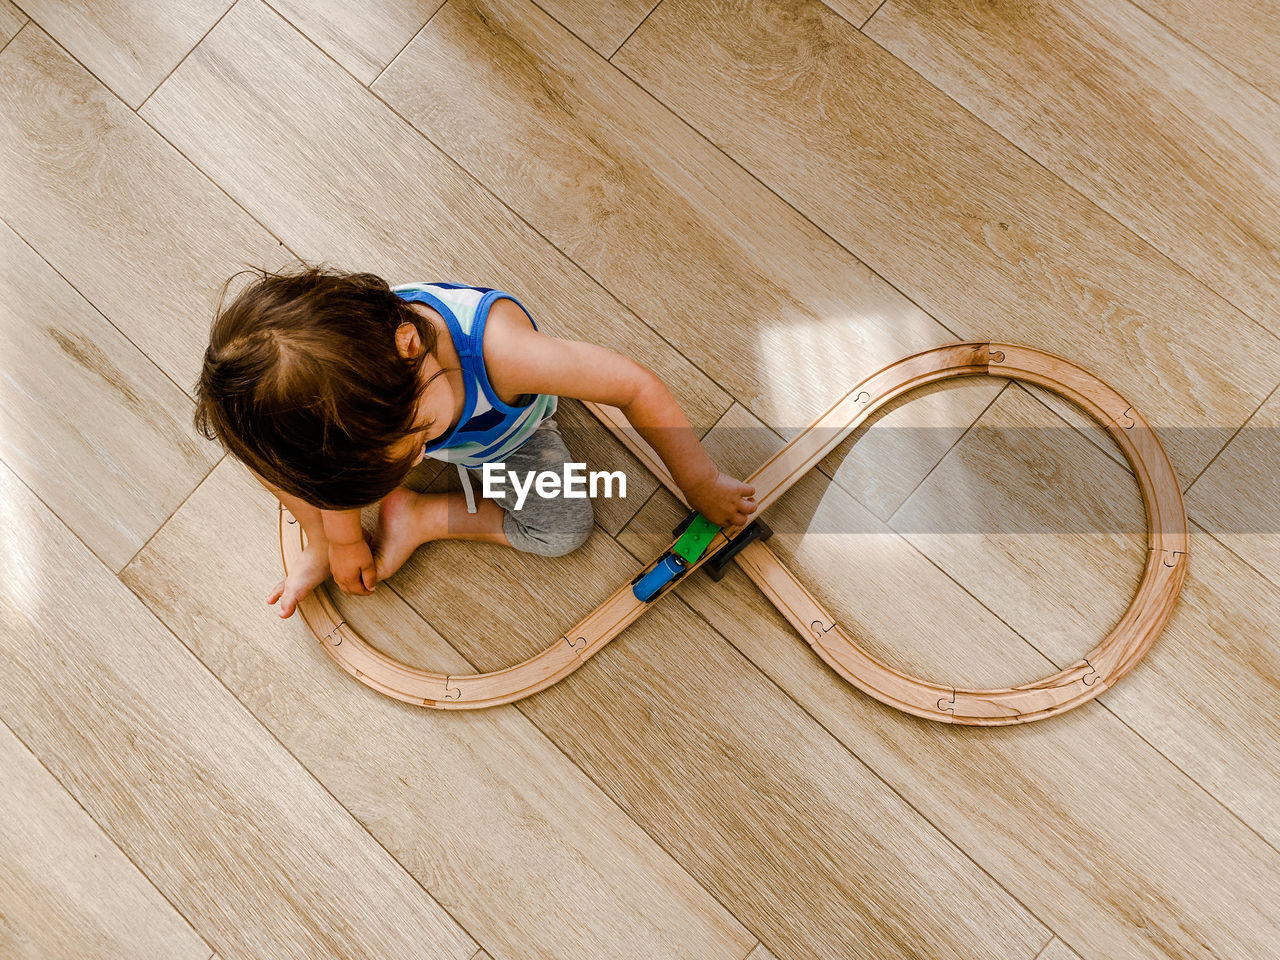 A toddler playing with toy trains sitting on the floor